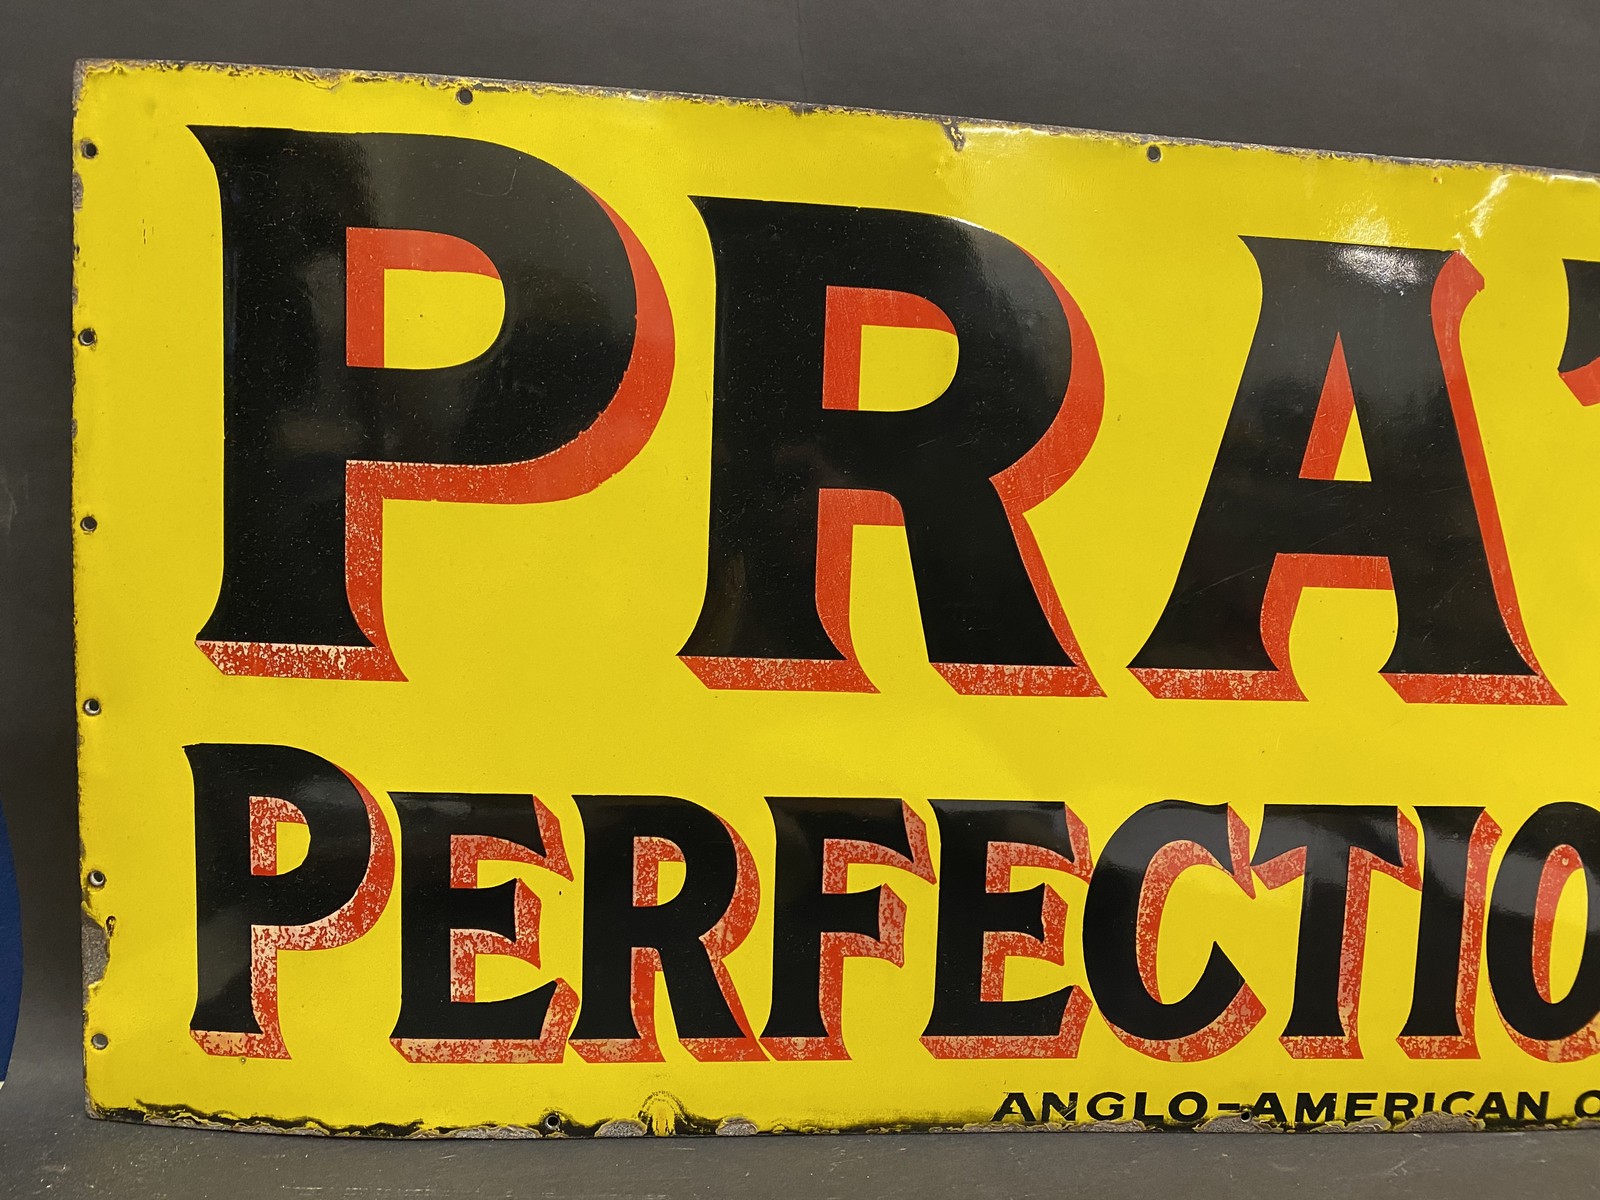 A Pratt's Perfection Spirit rectangular enamel sign by Imperial Enamel, in superb condition, 52 x - Image 2 of 6